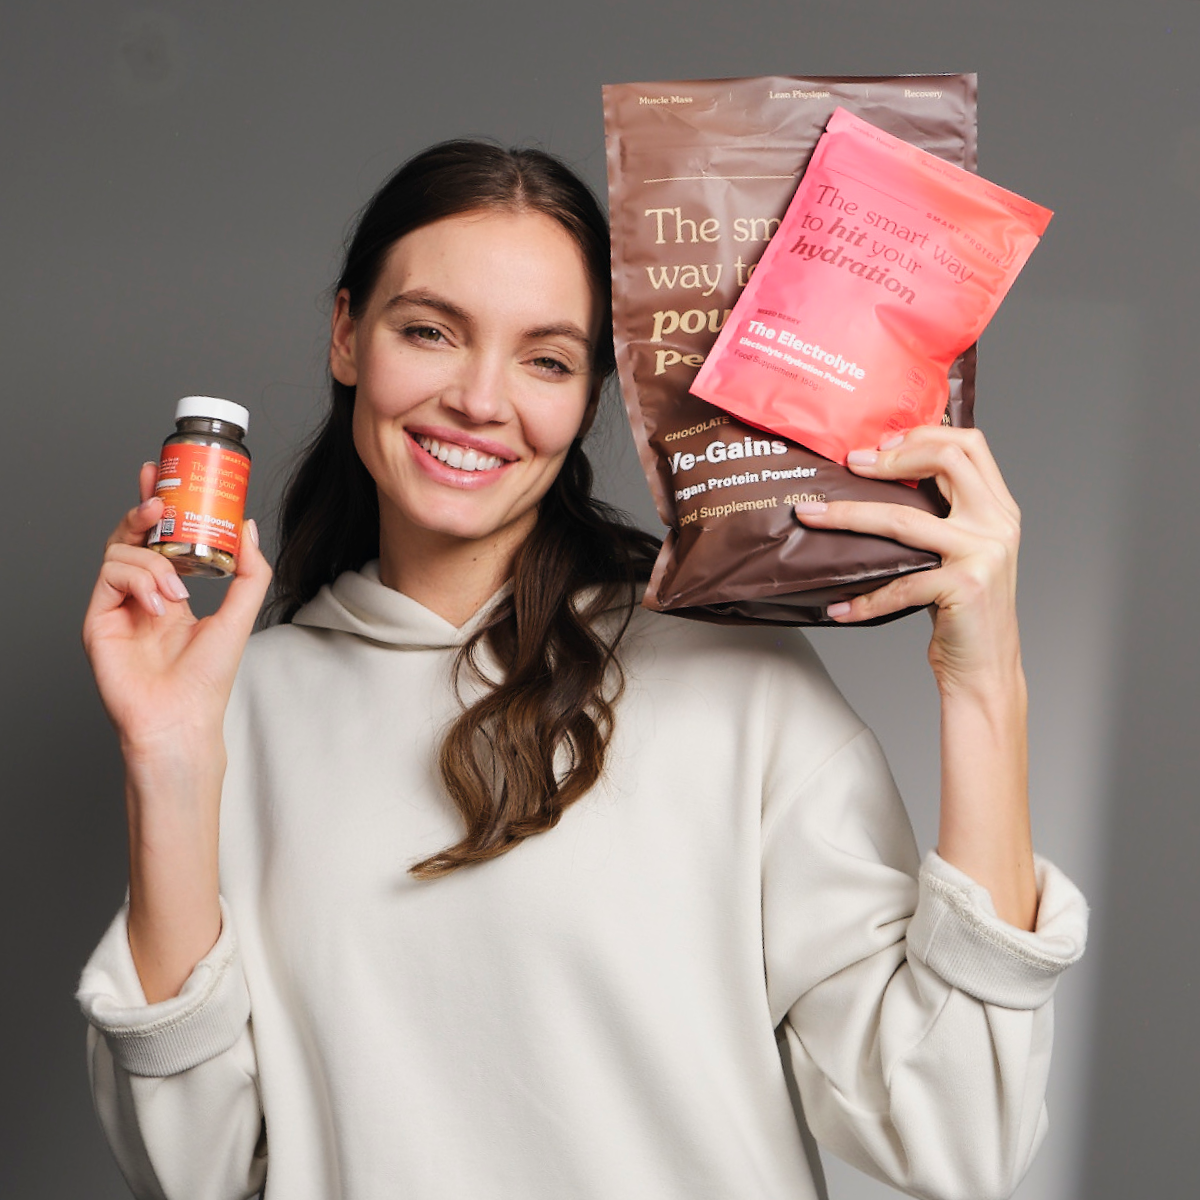 The Active Vegan Smart Start Kit and Lady Smiling